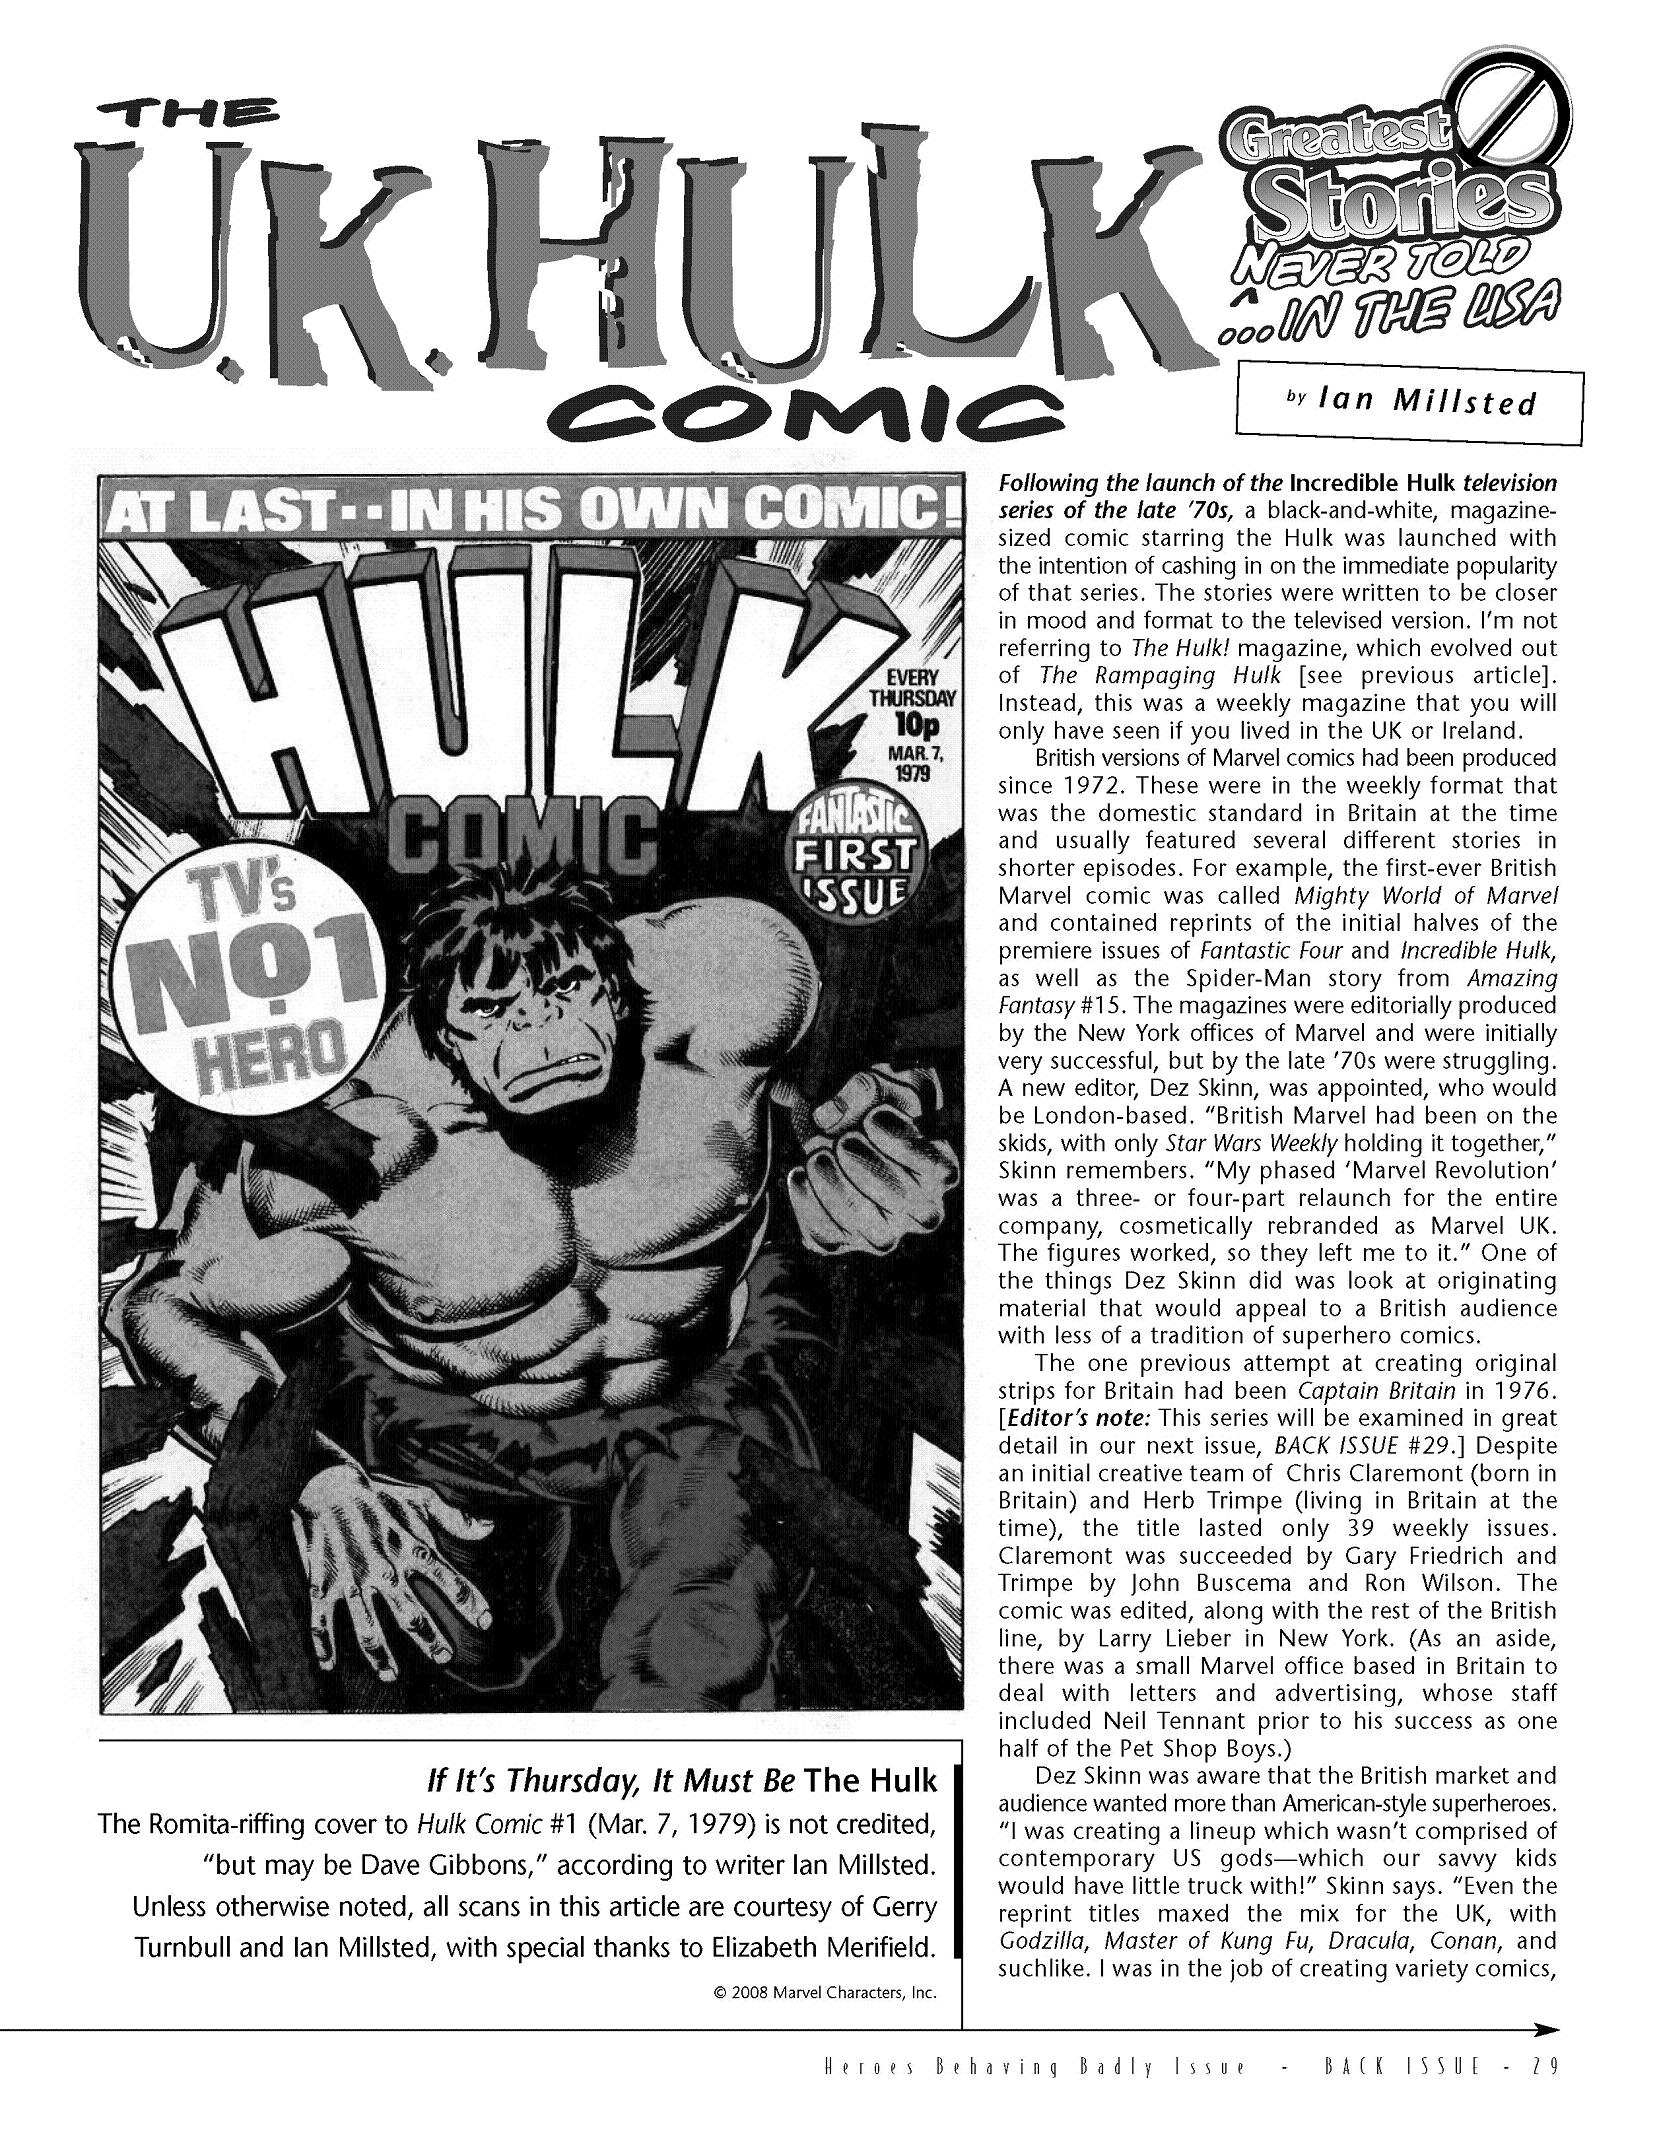 Read online Back Issue comic -  Issue #28 - 29